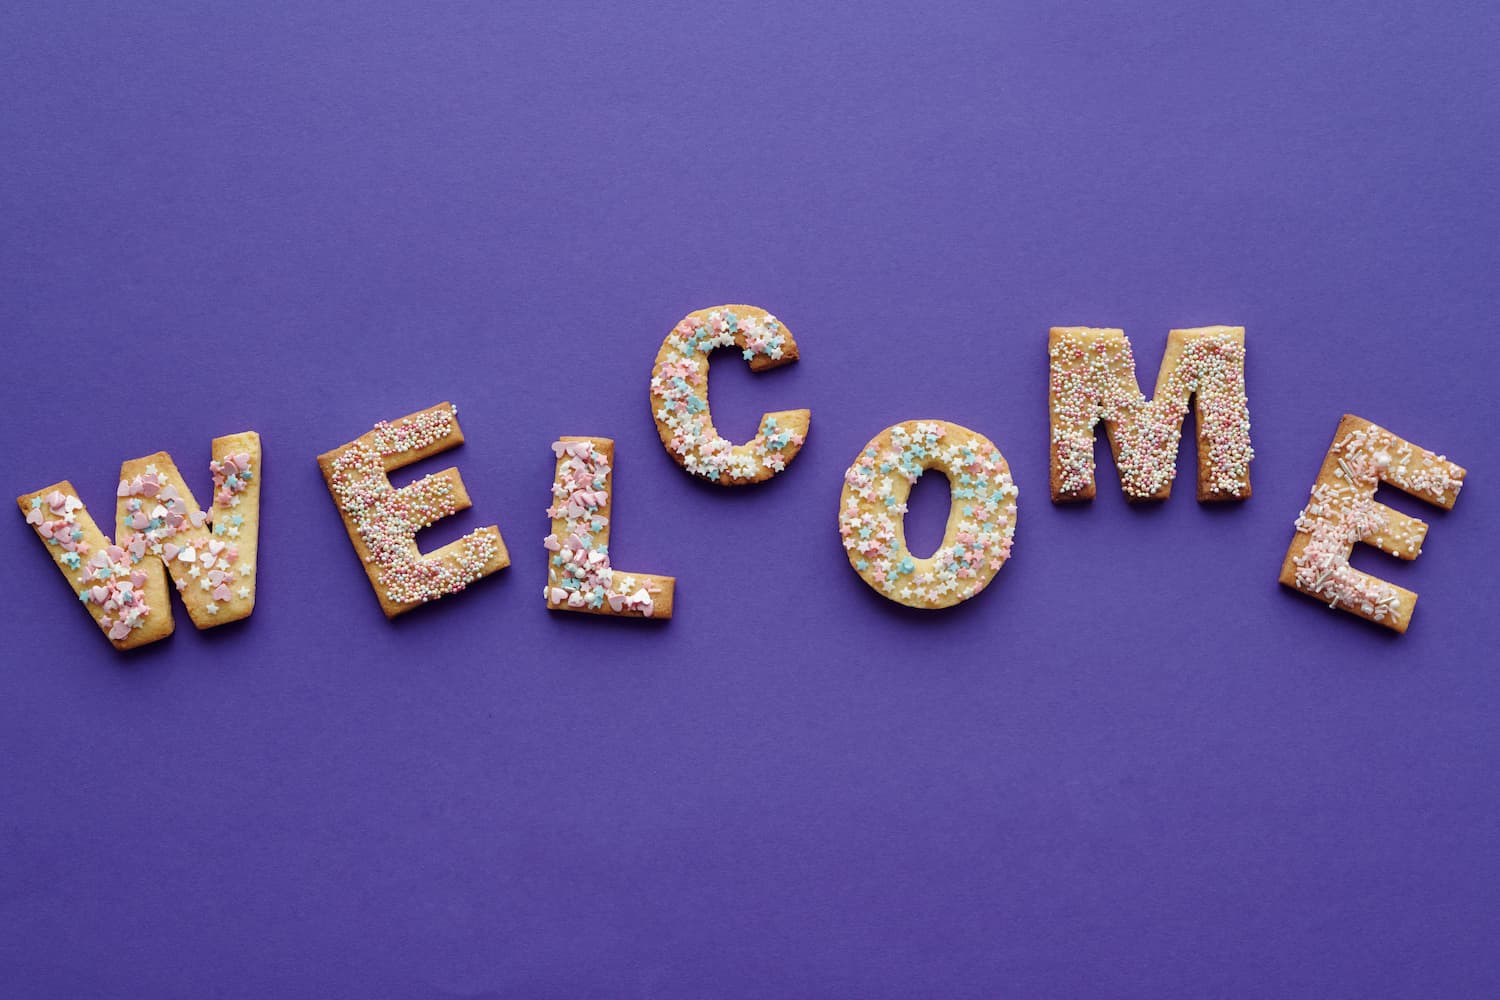 Featured image for “New Member Welcome”